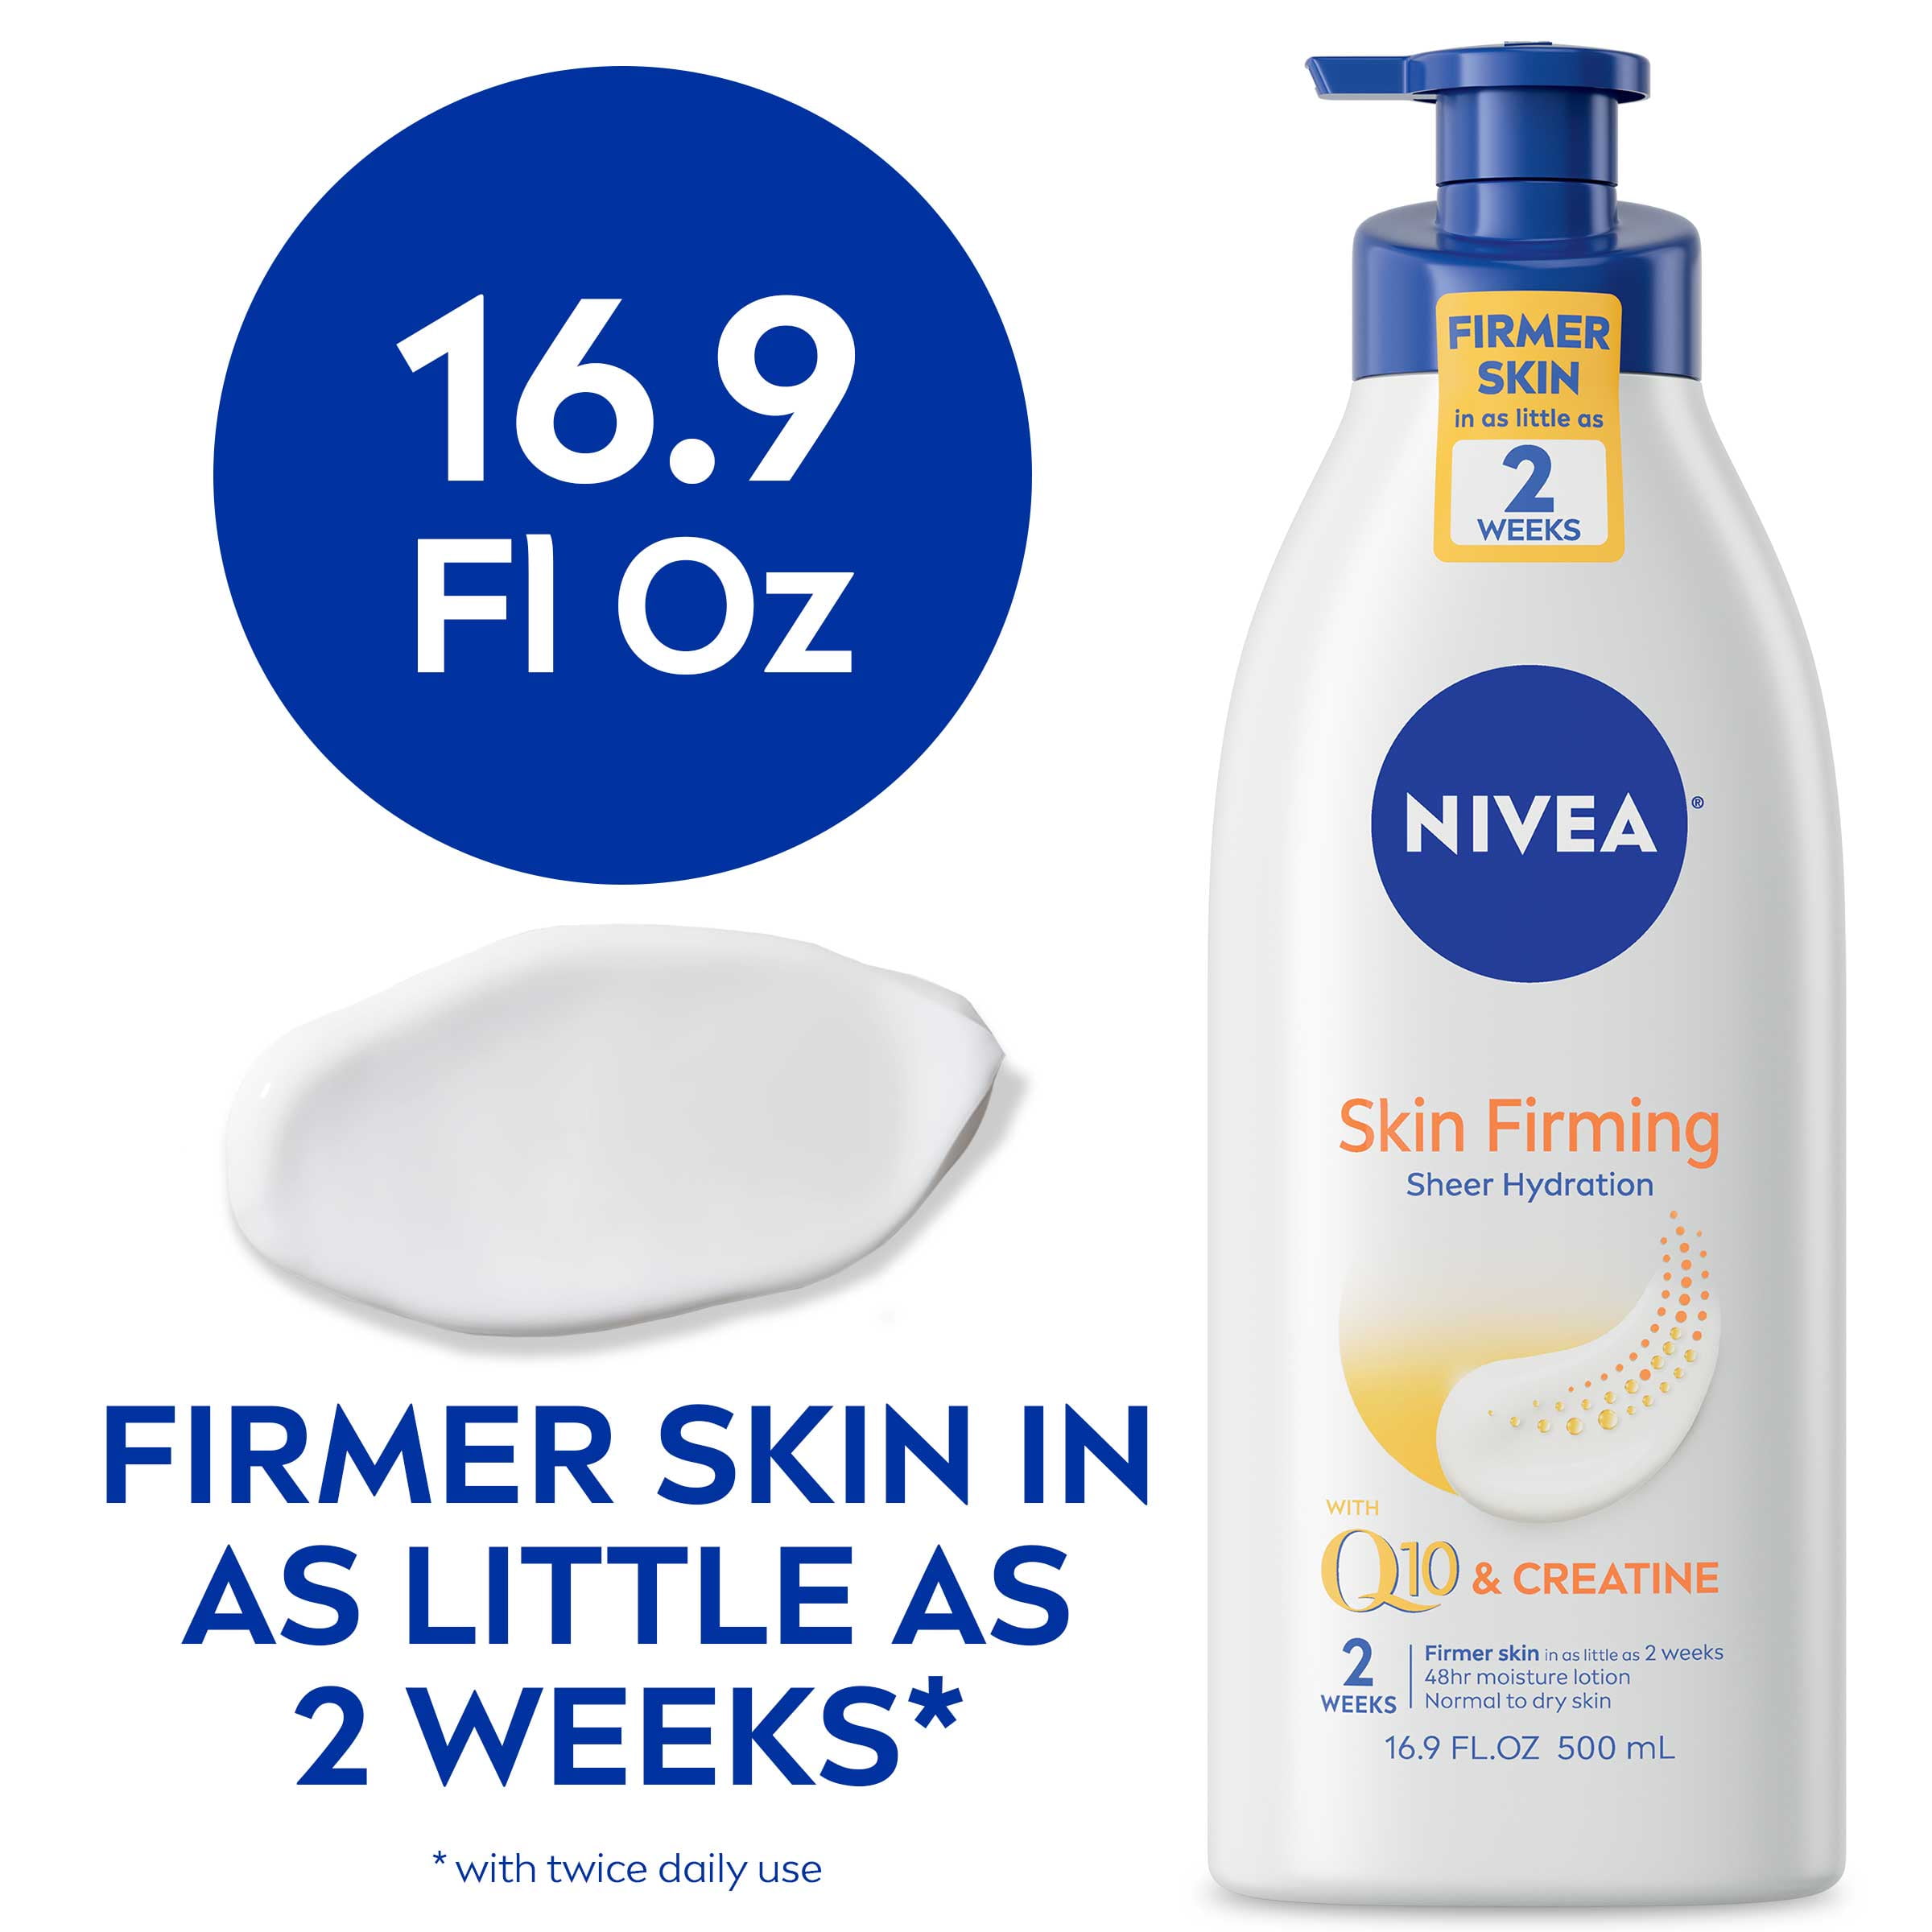 NIVEA Skin Firming Hydration Body Lotion with Q10 and Shea Butter